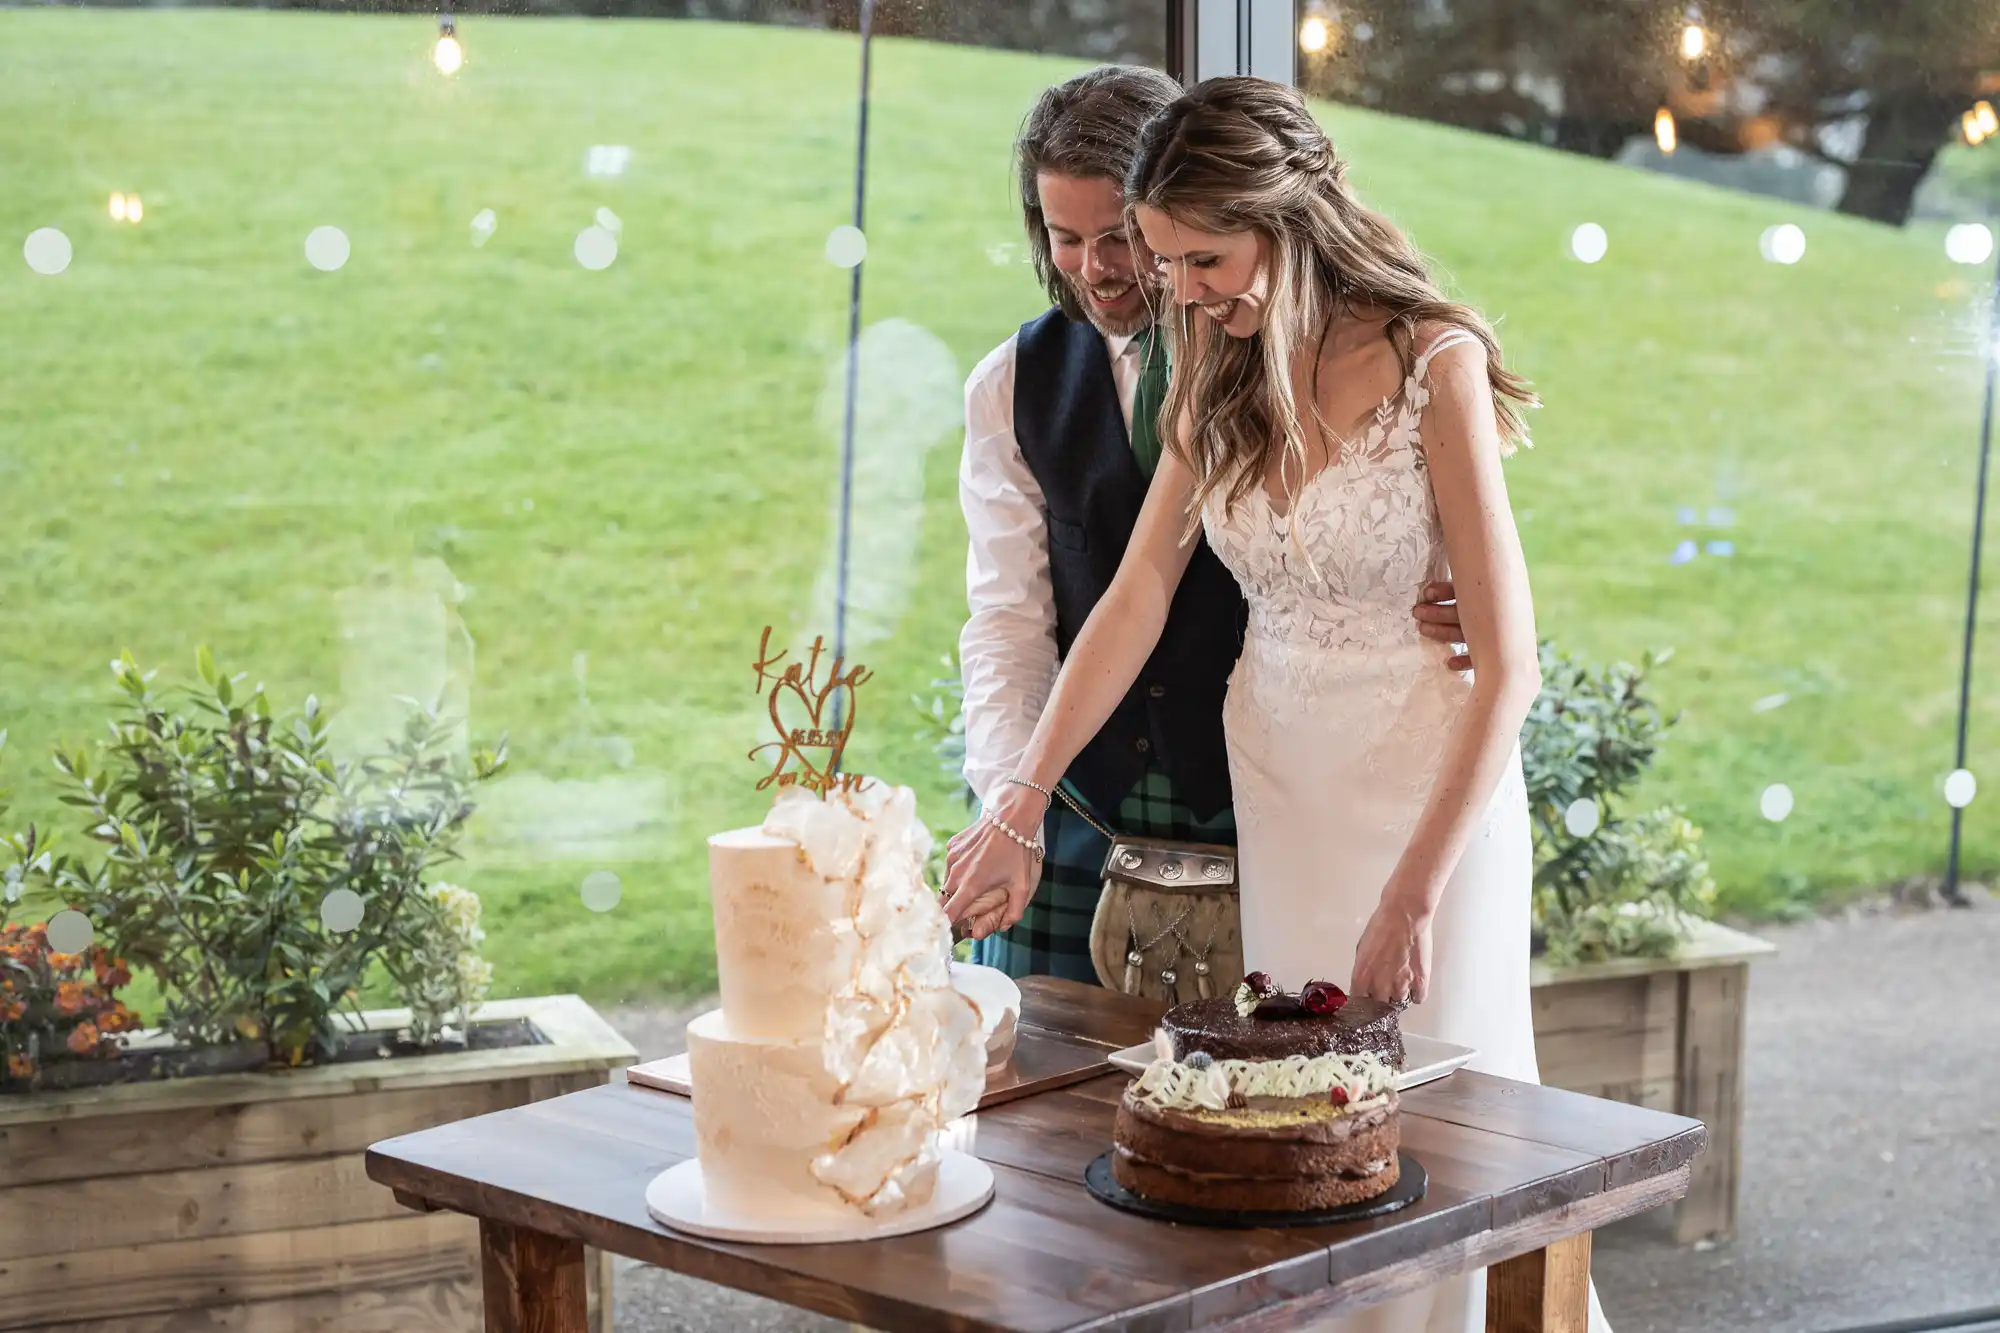 A couple cuts their wedding cake together. They stand in front of a window with a grassy hill outside. There are two cakes on the table; one is tiered and white, the other is a single-layer chocolate cake.